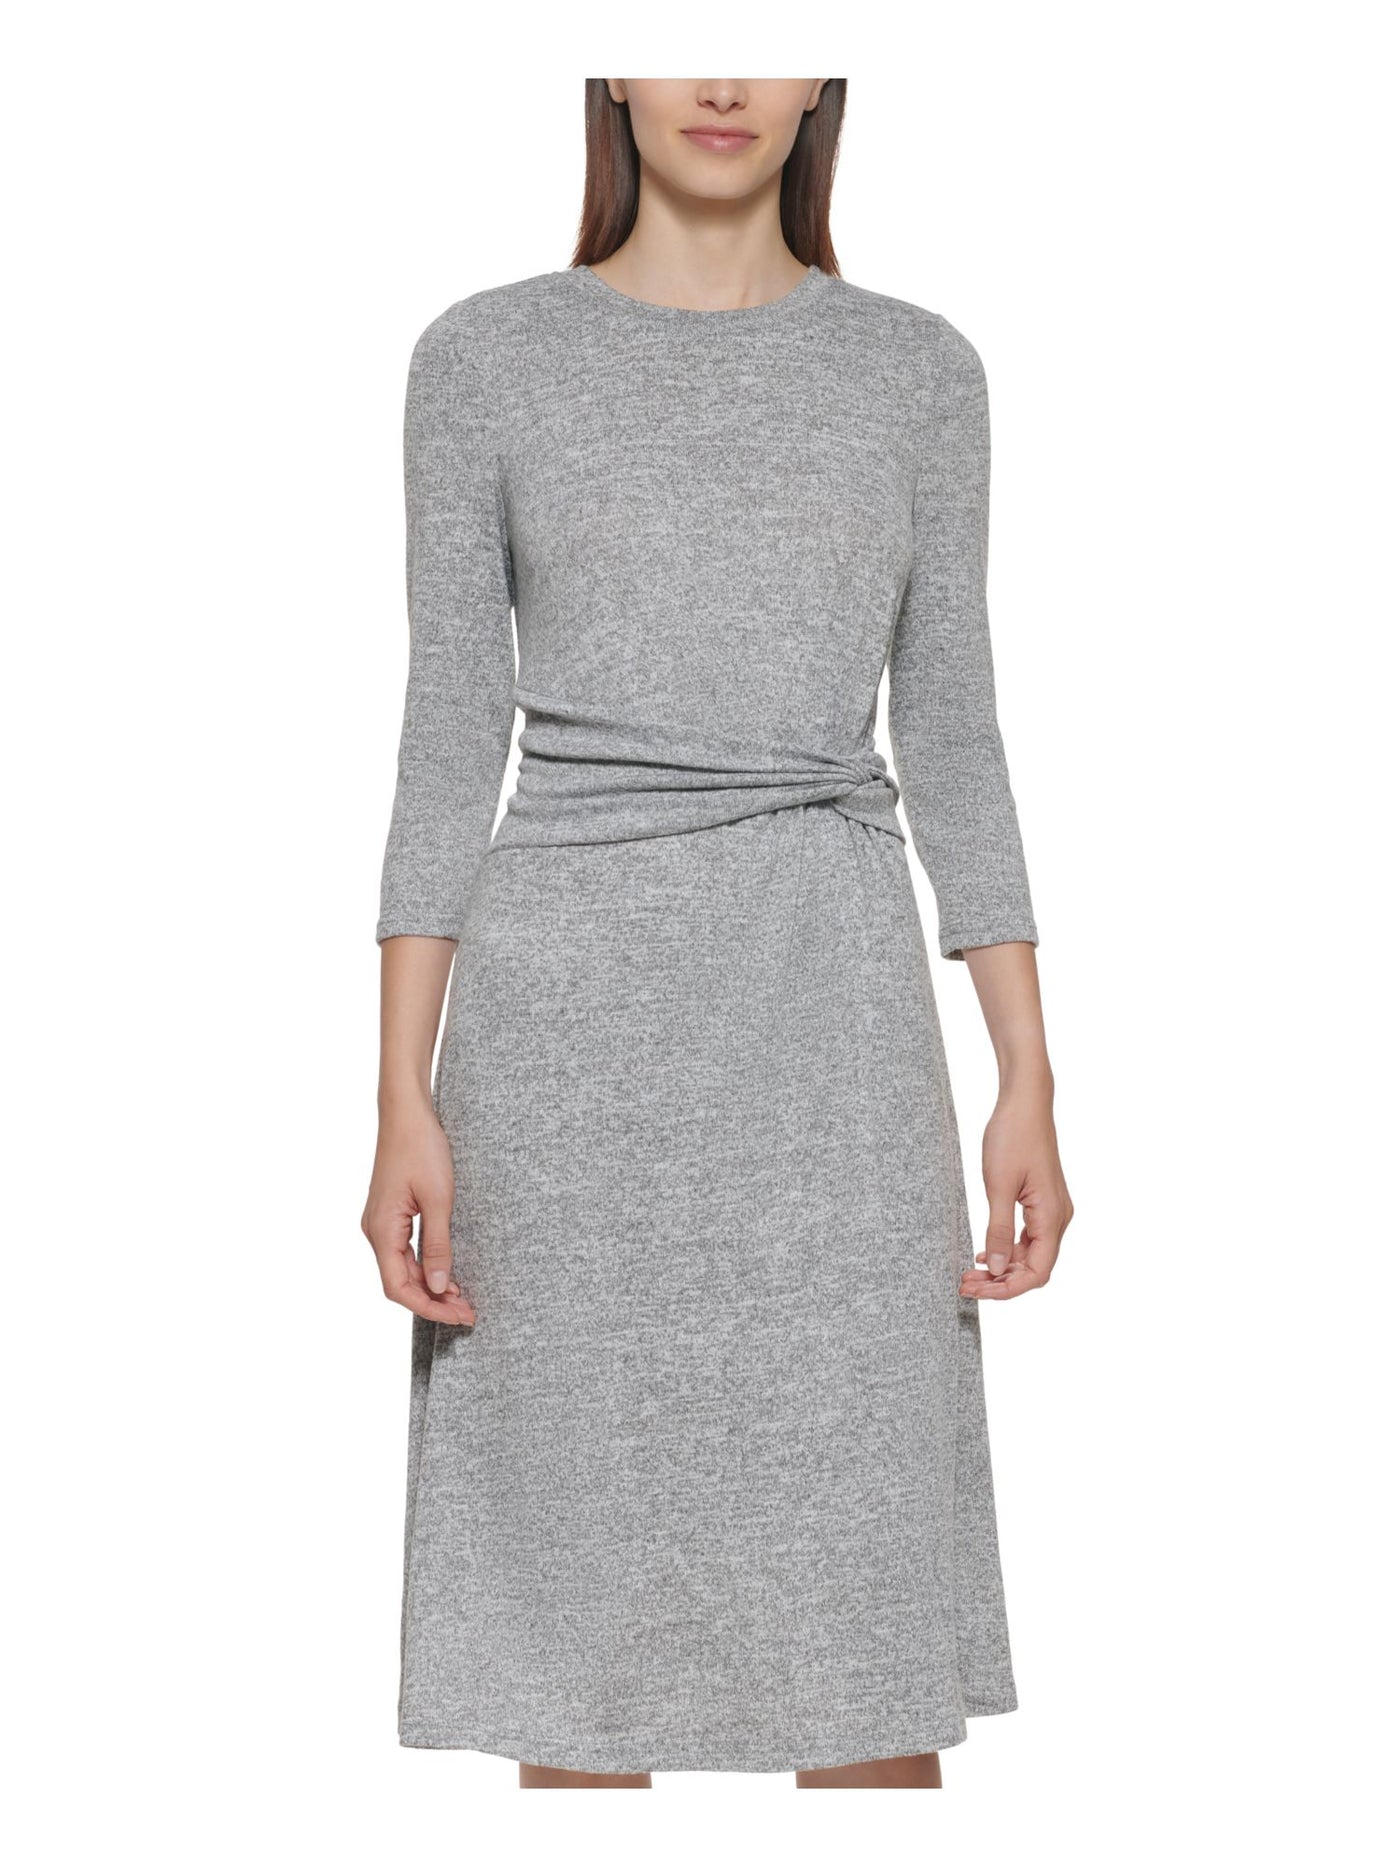 CALVIN KLEIN Womens Gray Stretch Ruched Pull-over Style Heather 3/4 Sleeve Round Neck Midi Wear To Work Shift Dress 10